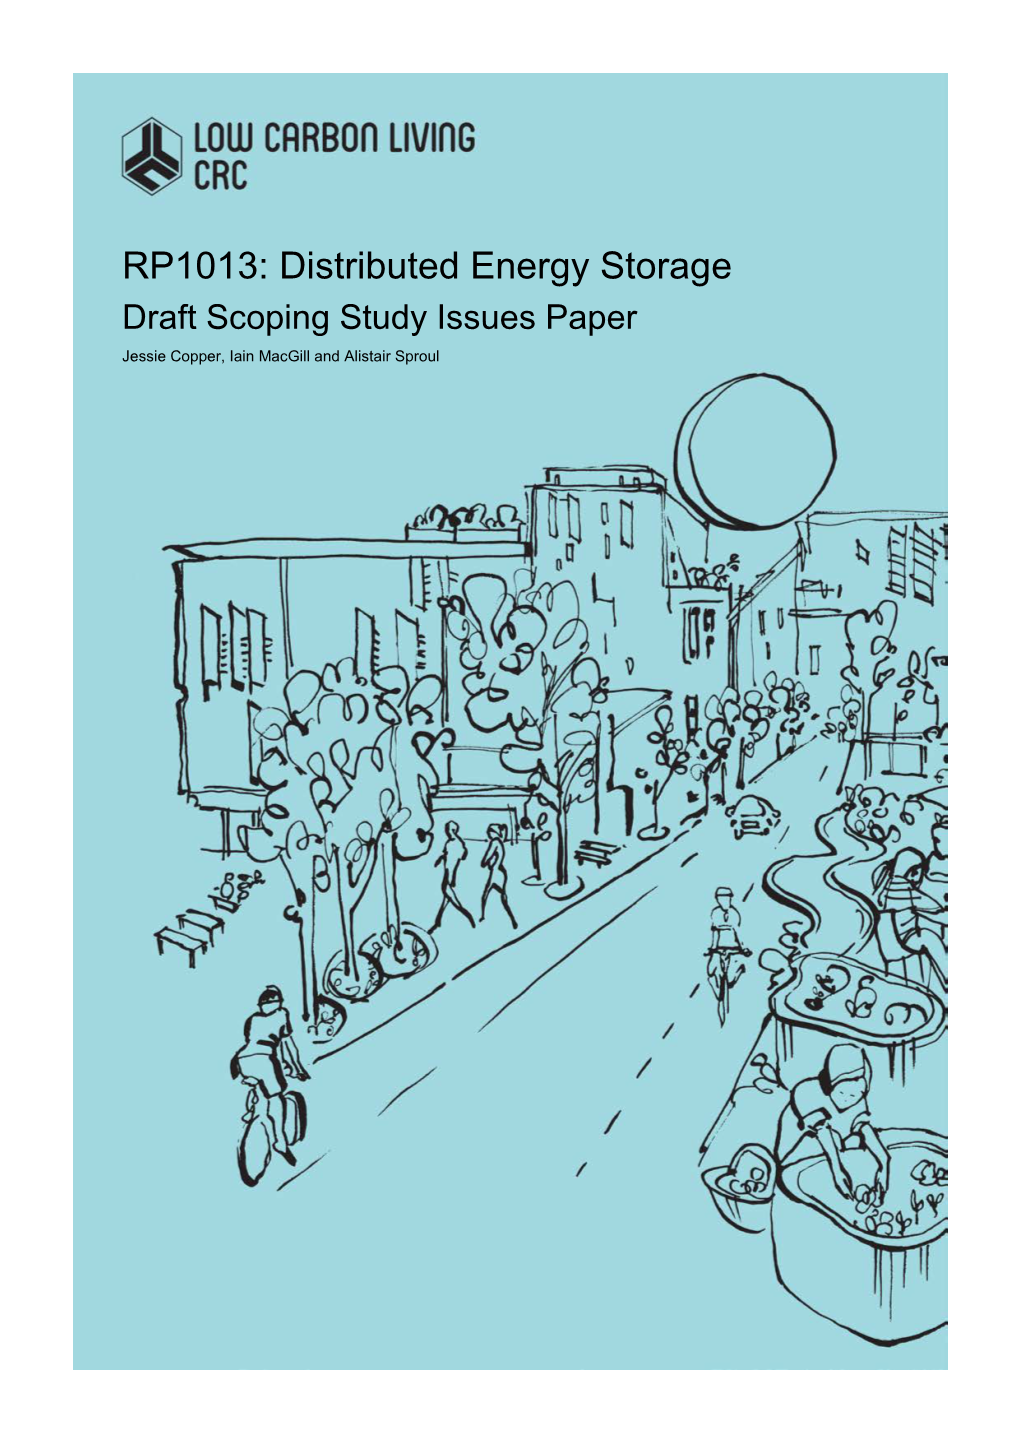 RP1013: Distributed Energy Storage Draft Scoping Study Issues Paper Jessie Copper, Iain Macgill and Alistair Sproul